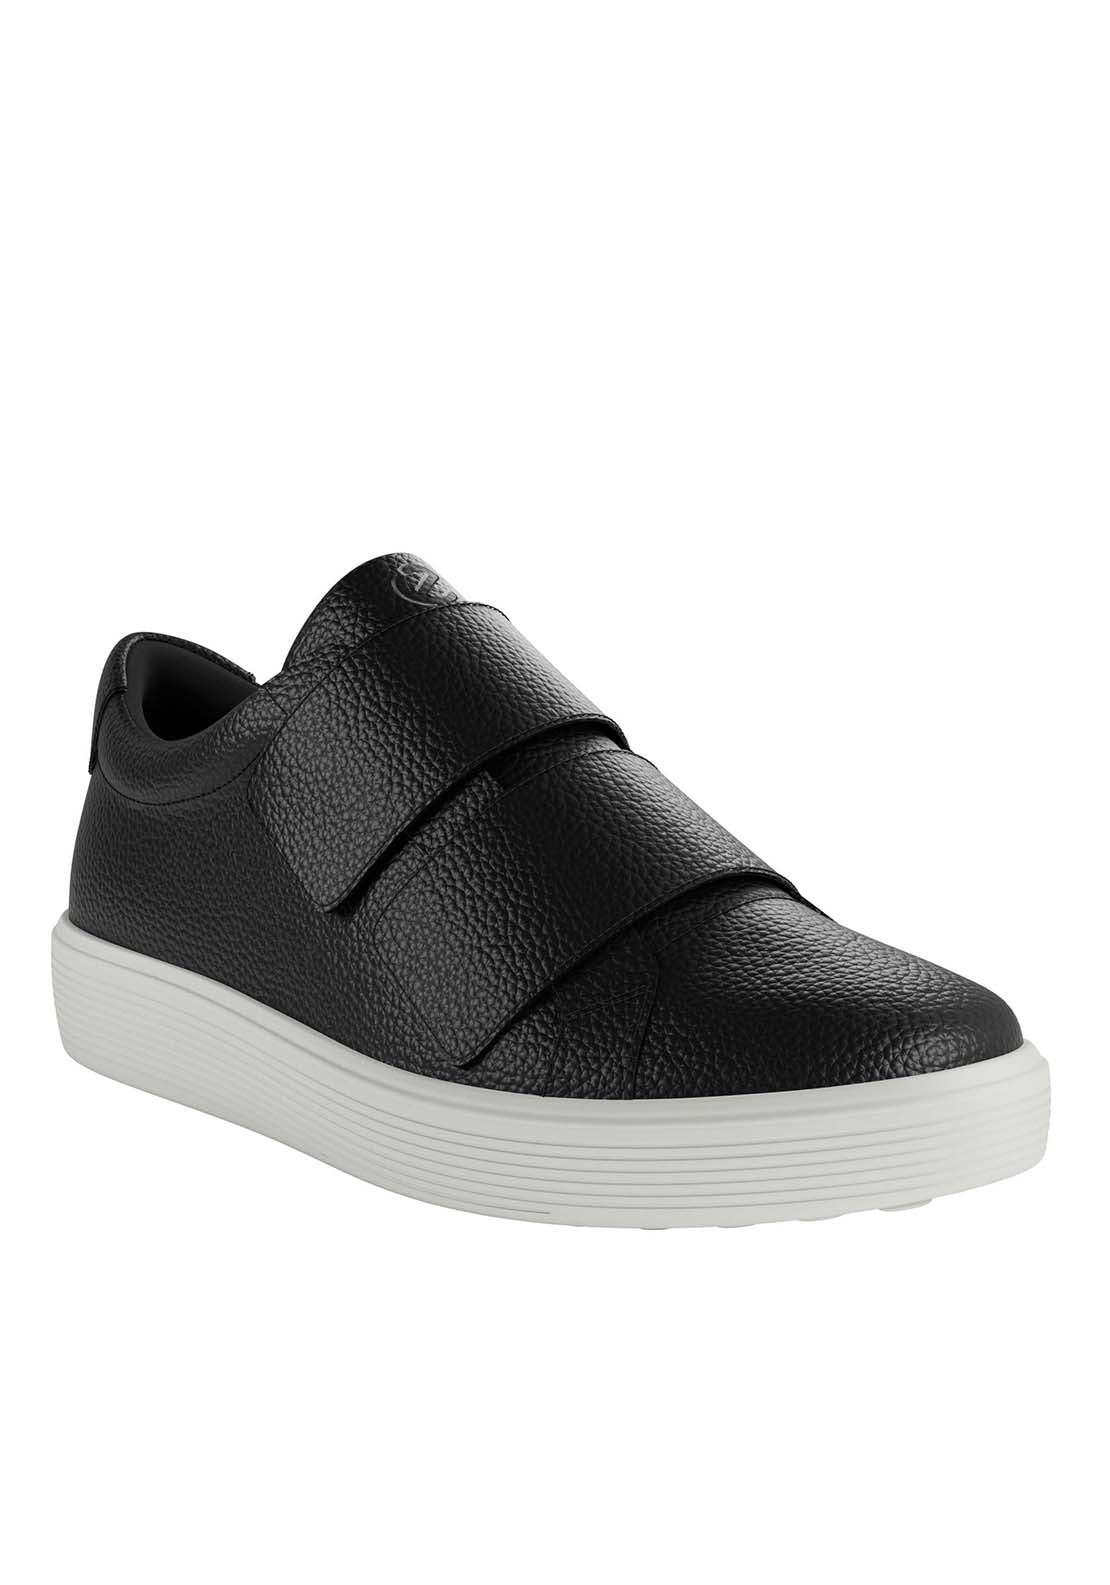 Ecco Soft 60 Casual Velcro Shoe 1 Shaws Department Stores